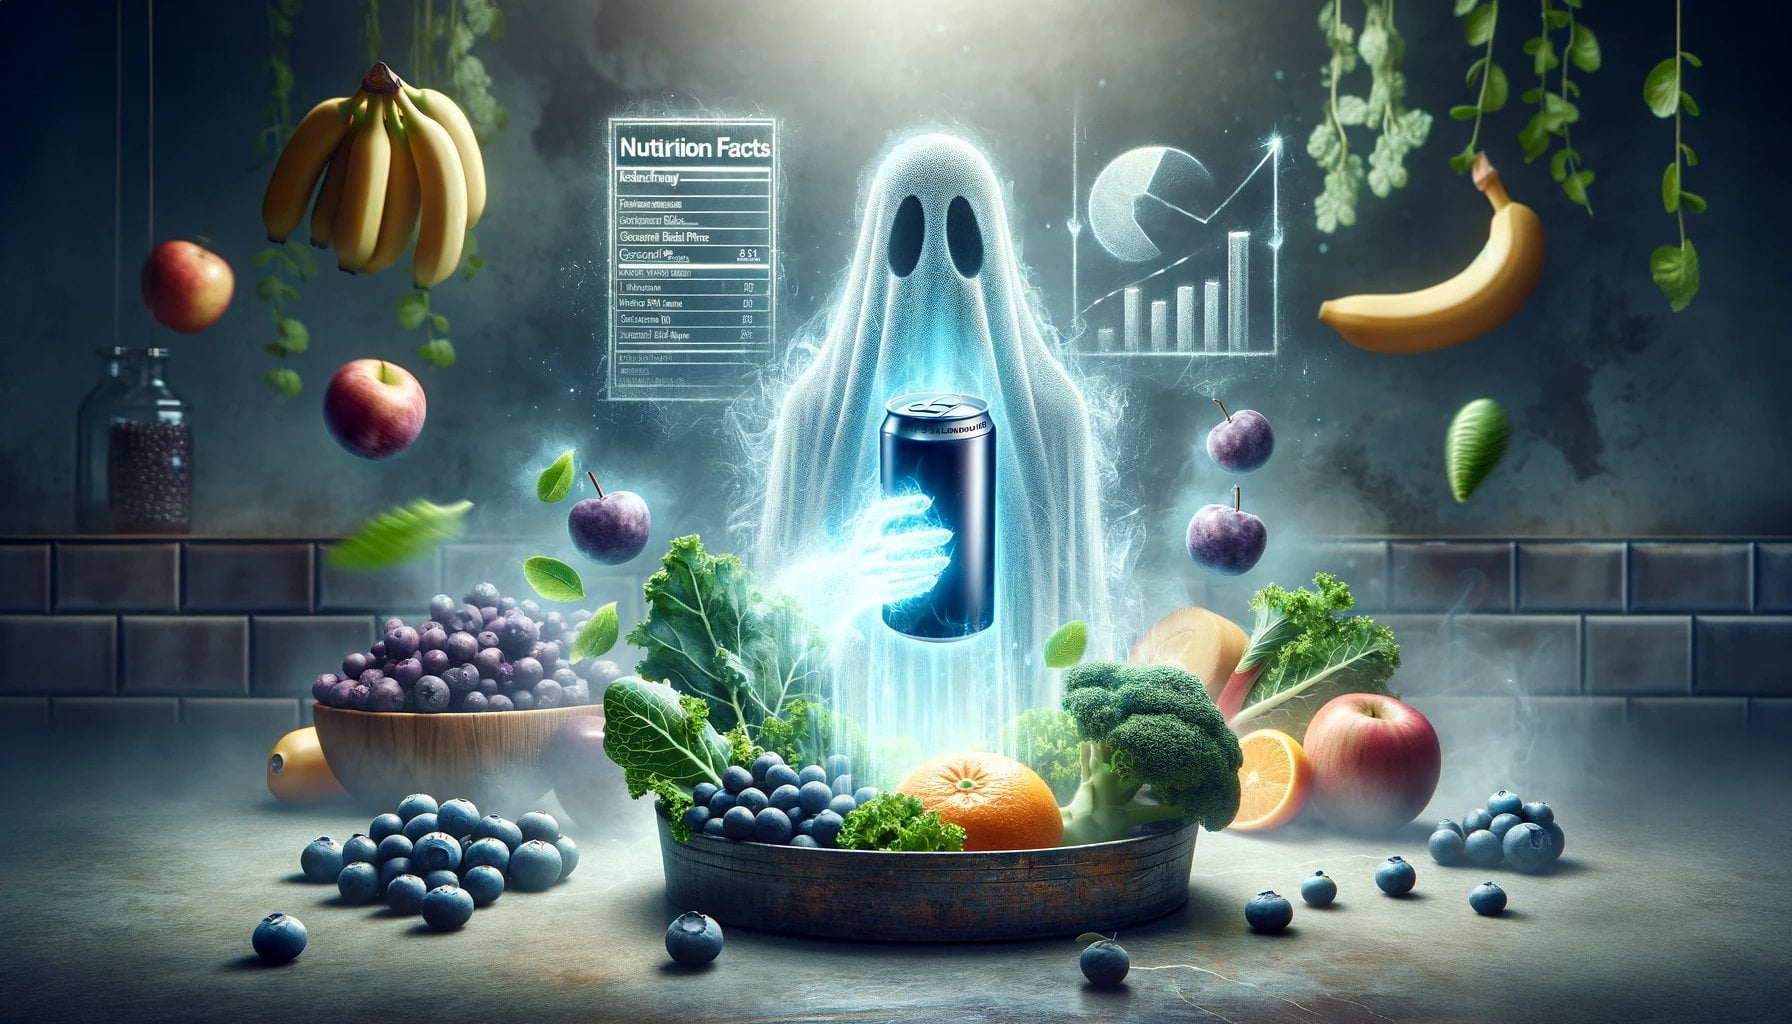 ghost energy drink nutrition facts 1